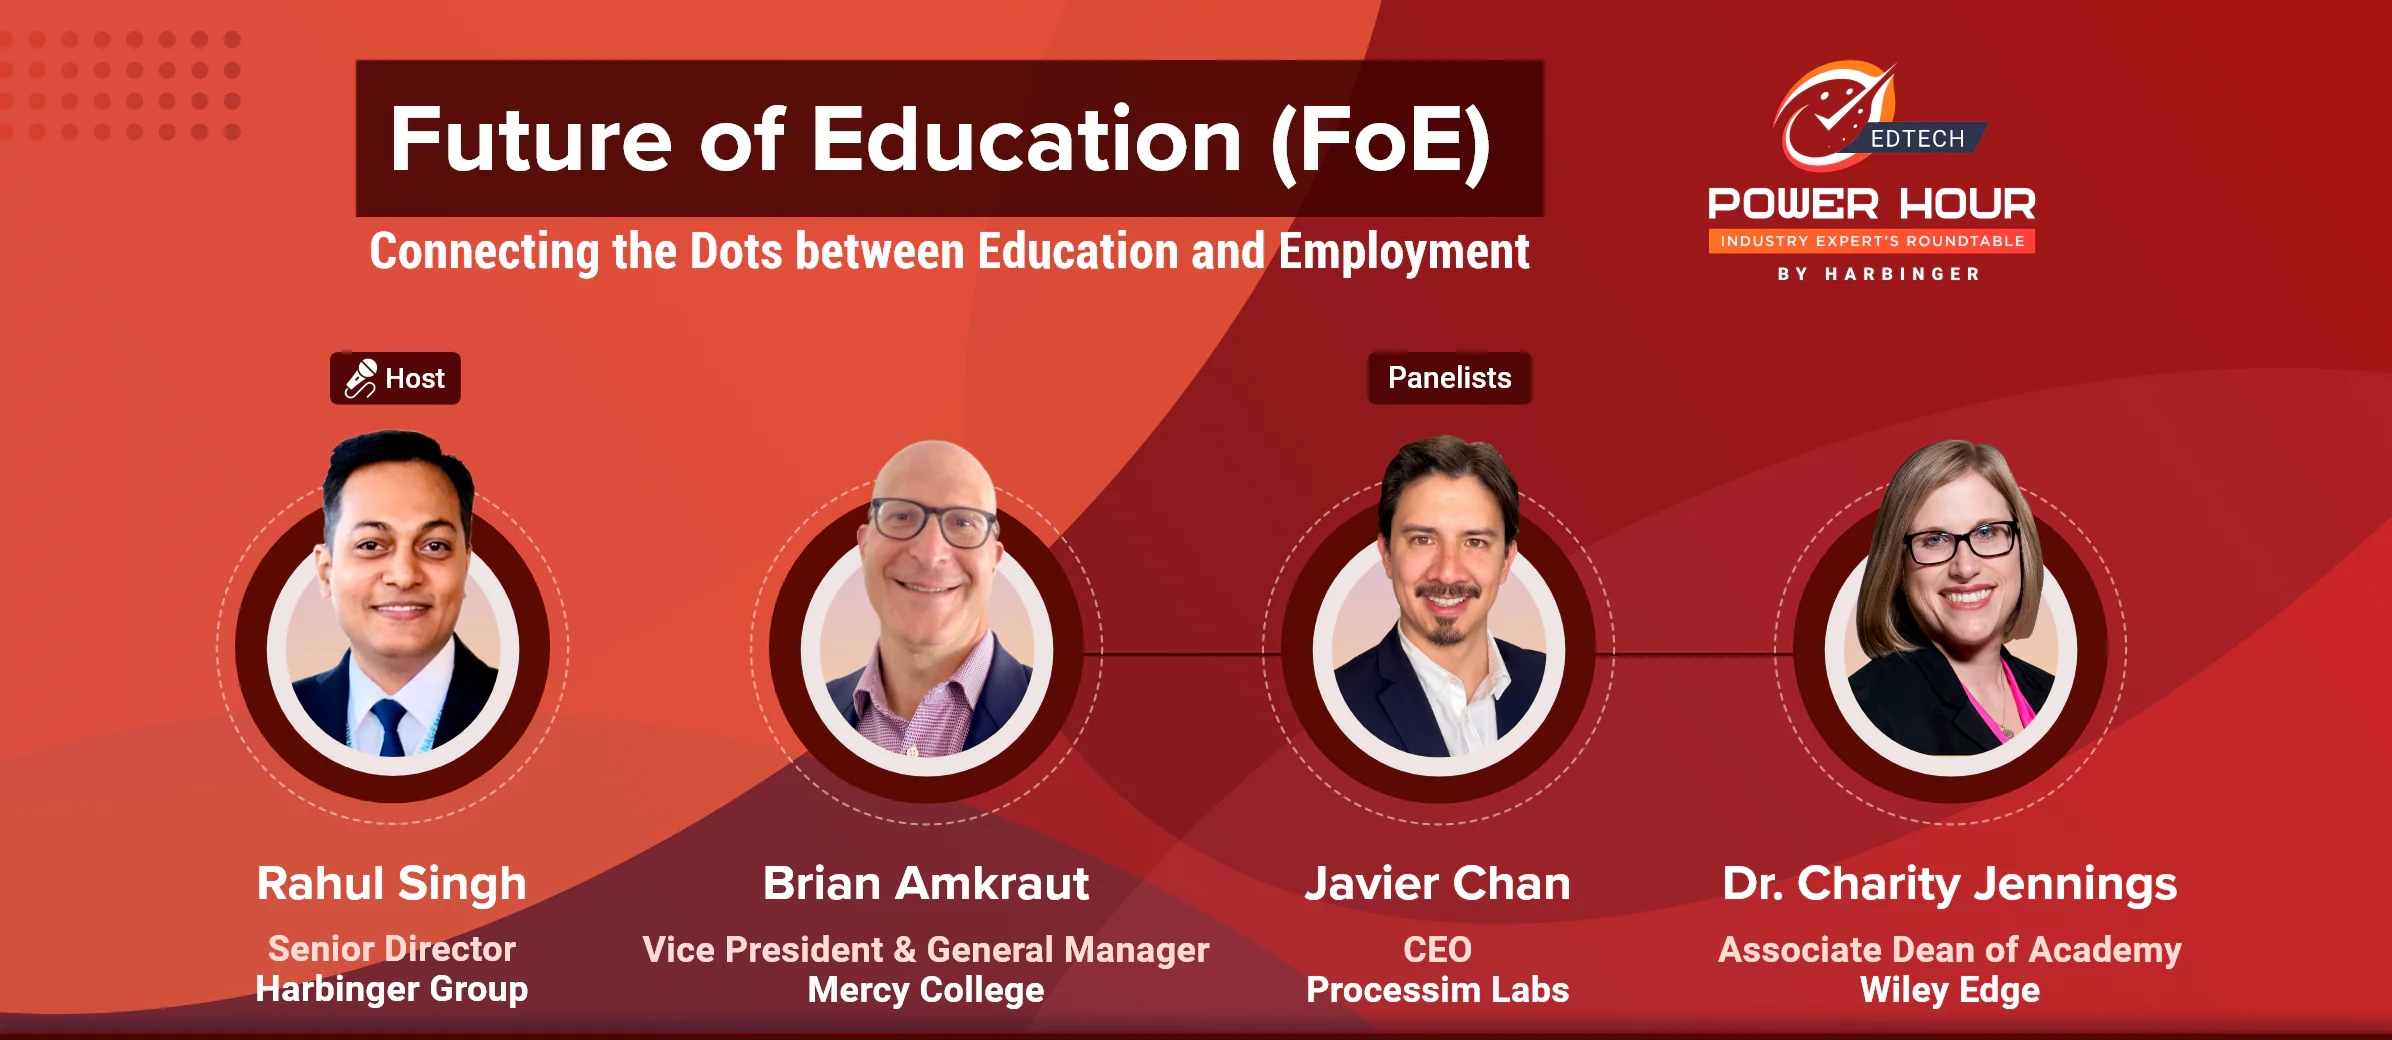 Panelists- Future of Education (FoE) Connecting the Dots between Education and Employment